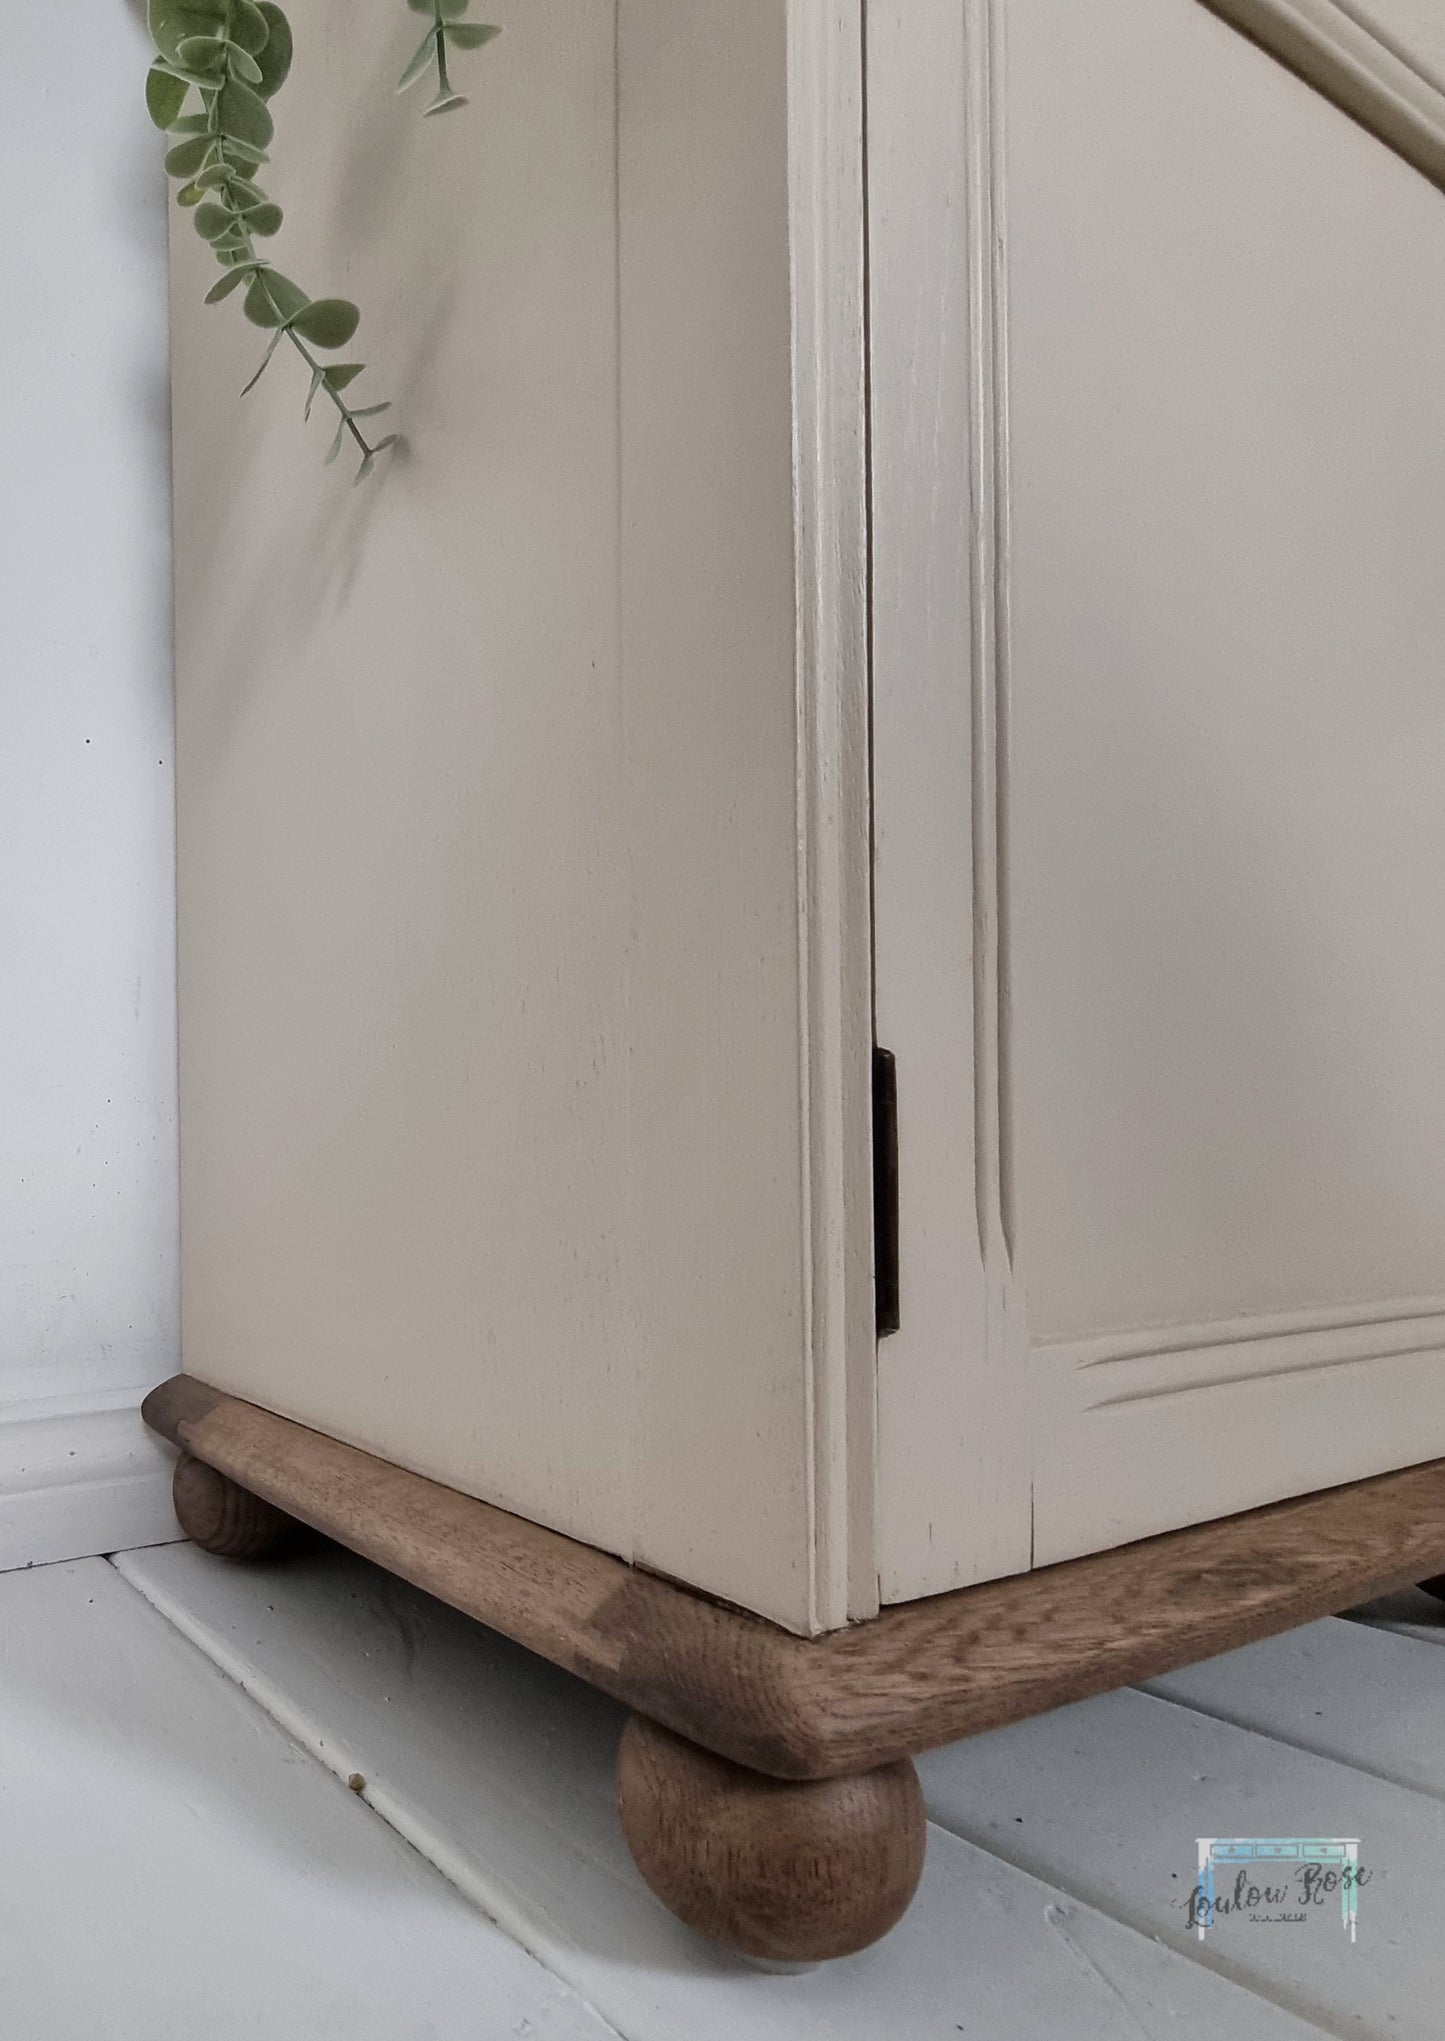 Priory Bedside Cabinet Painted in Beige with Green Interior